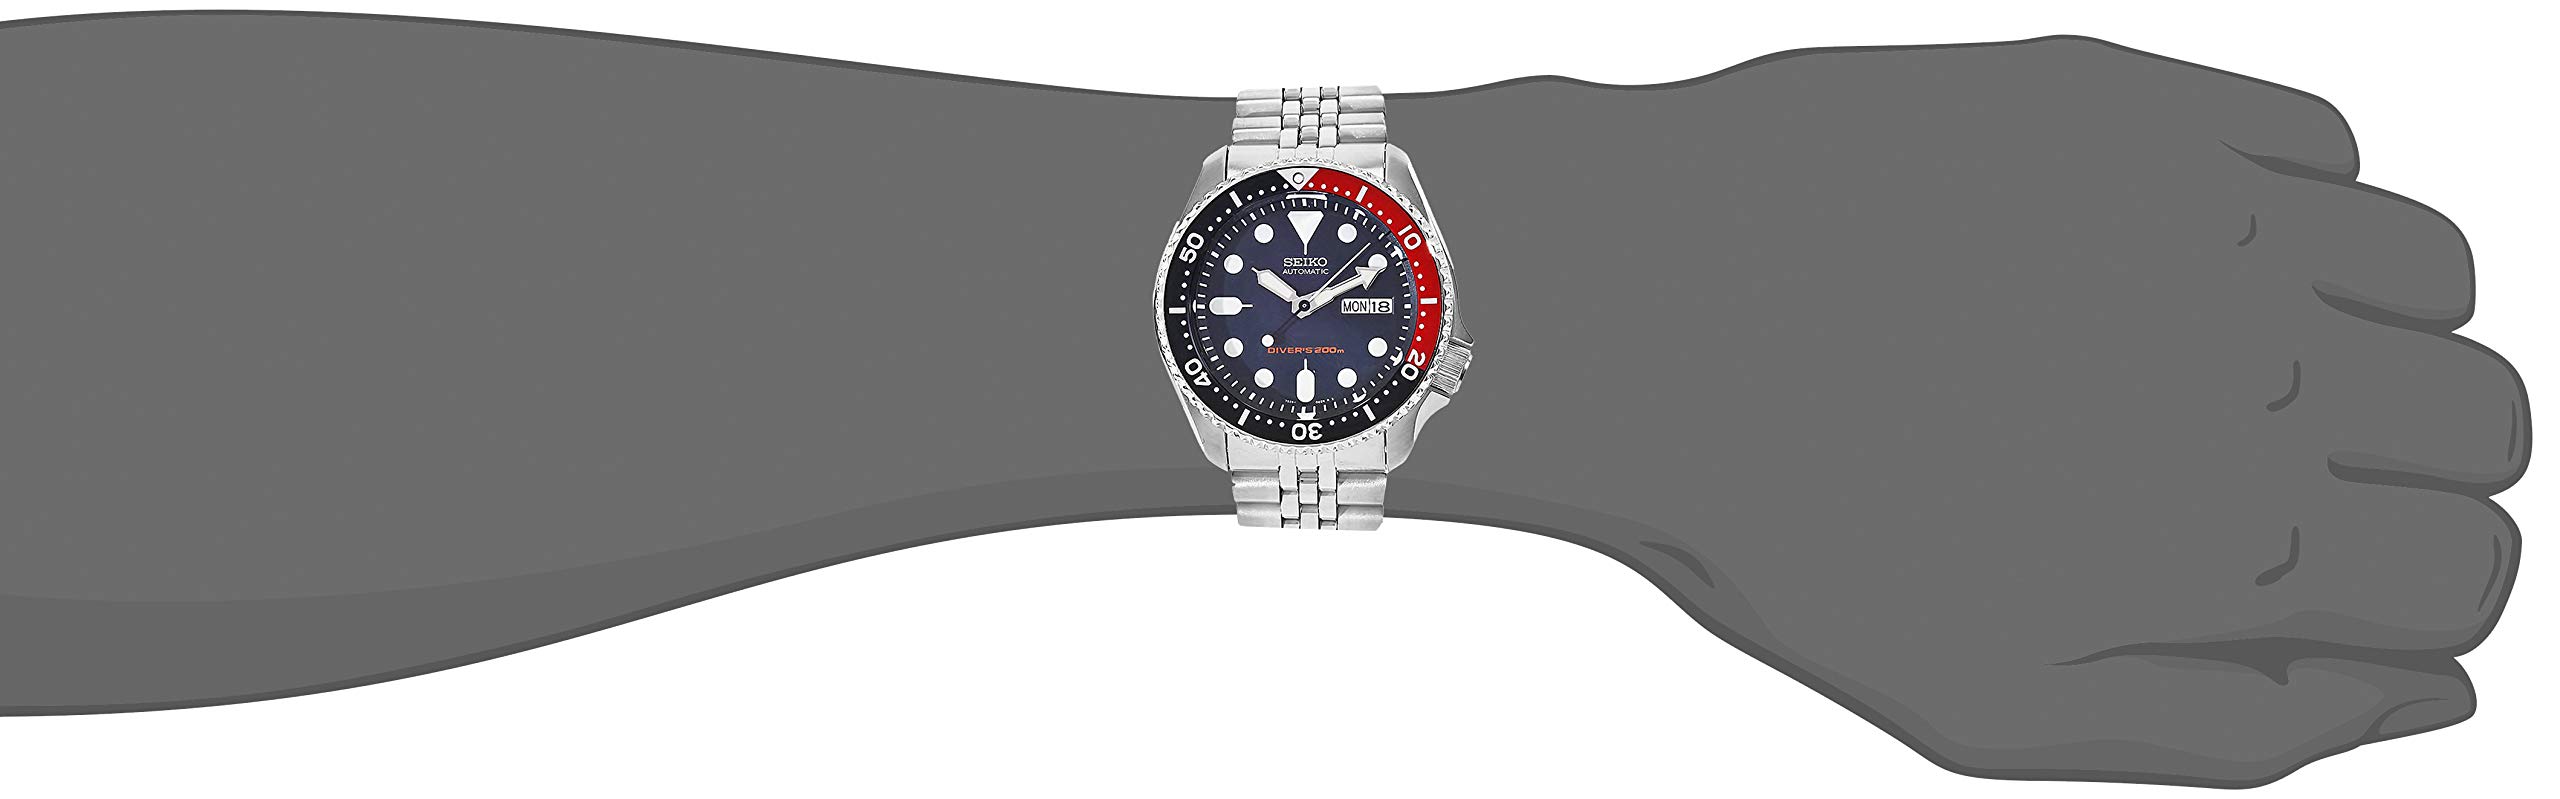 SEIKO Men's SKX009K2 Diver's Analog Automatic Stainless Steel Watch